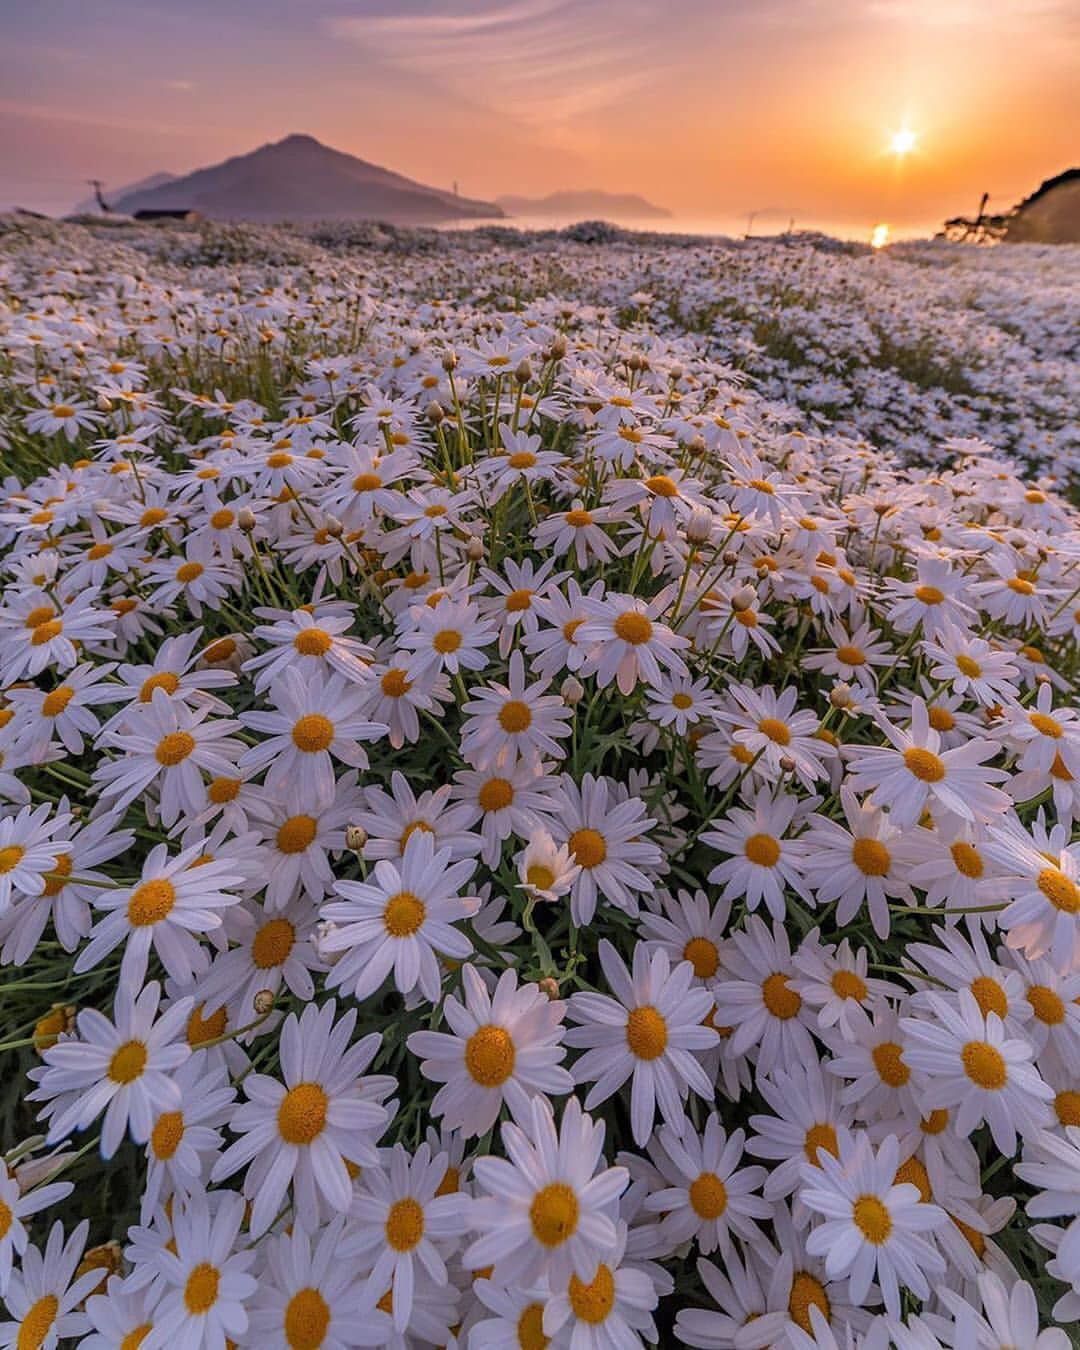 A field of white flowers with yellow centers in front of a mountain and a sunset - Sunset, daisy